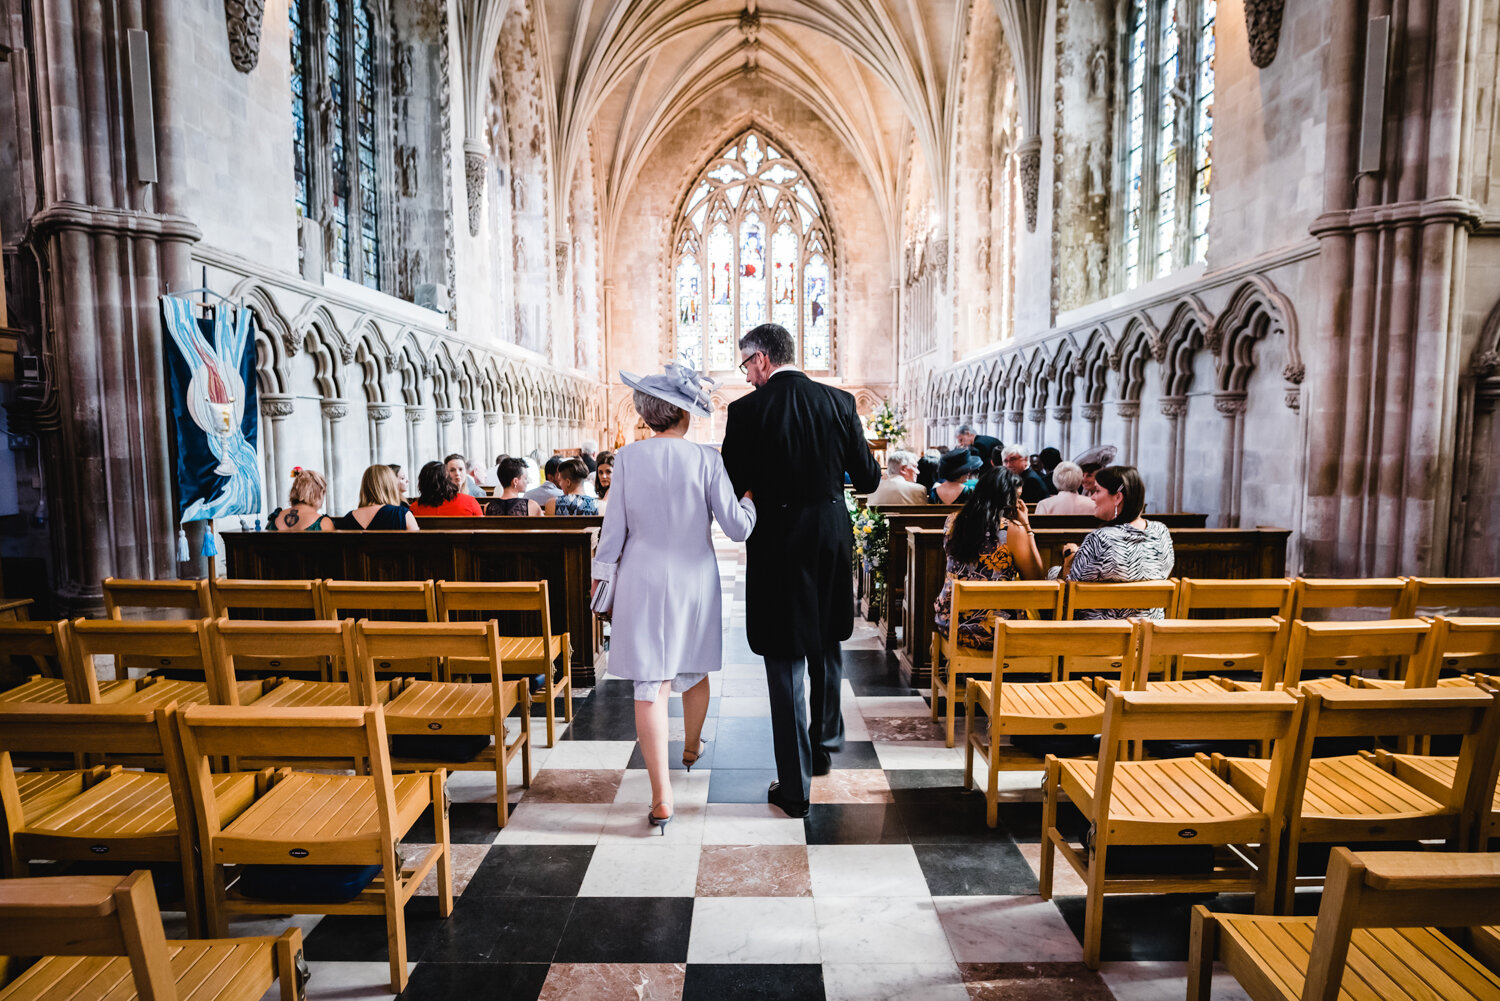 st-albans-cathedral-abbey-wedding-photos-pike-photography-88.jpg